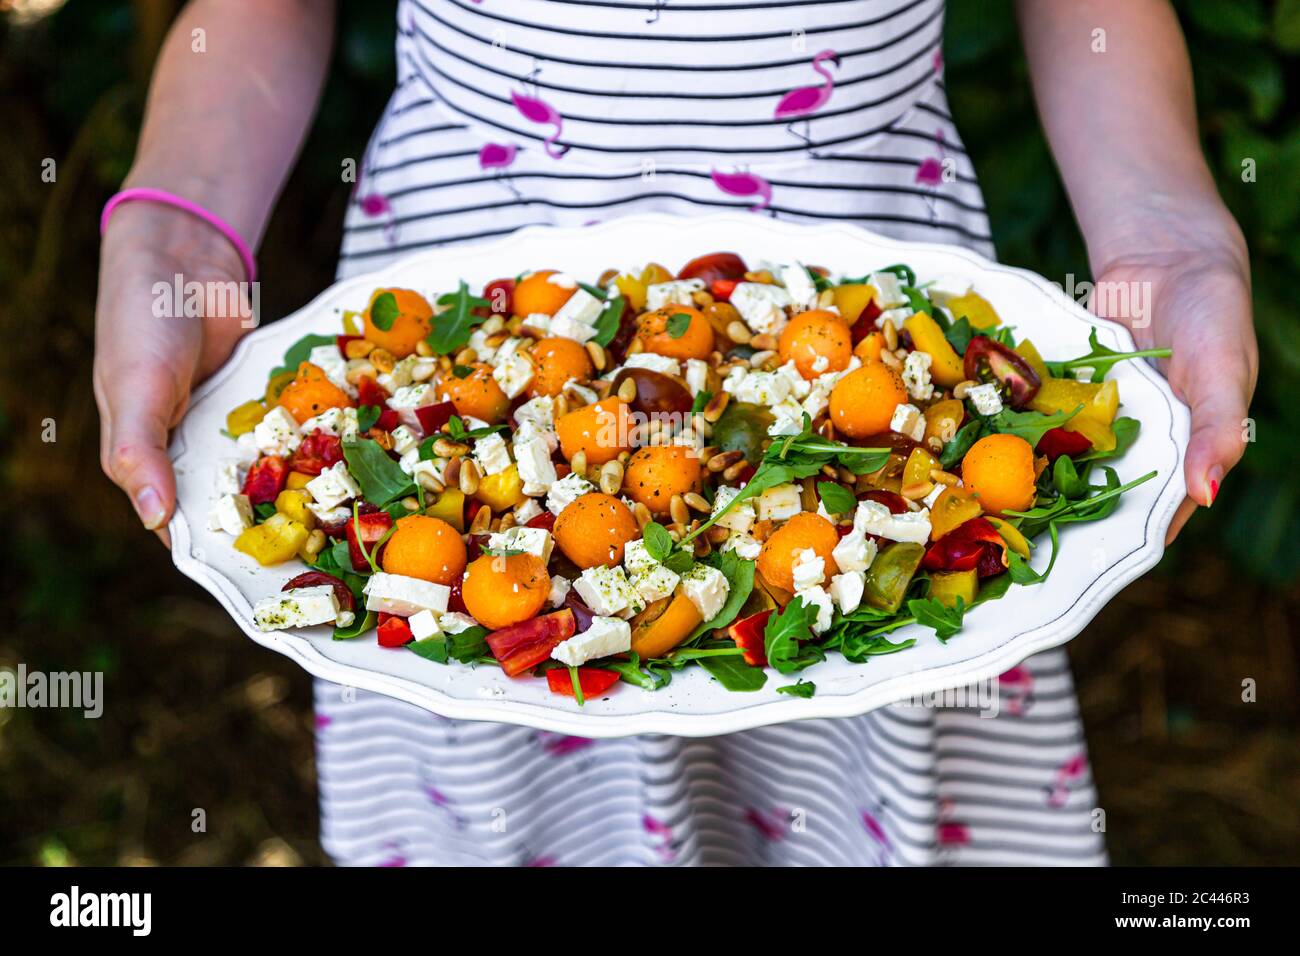 Midsection of woman holding plate with healthy salad Stock Photo